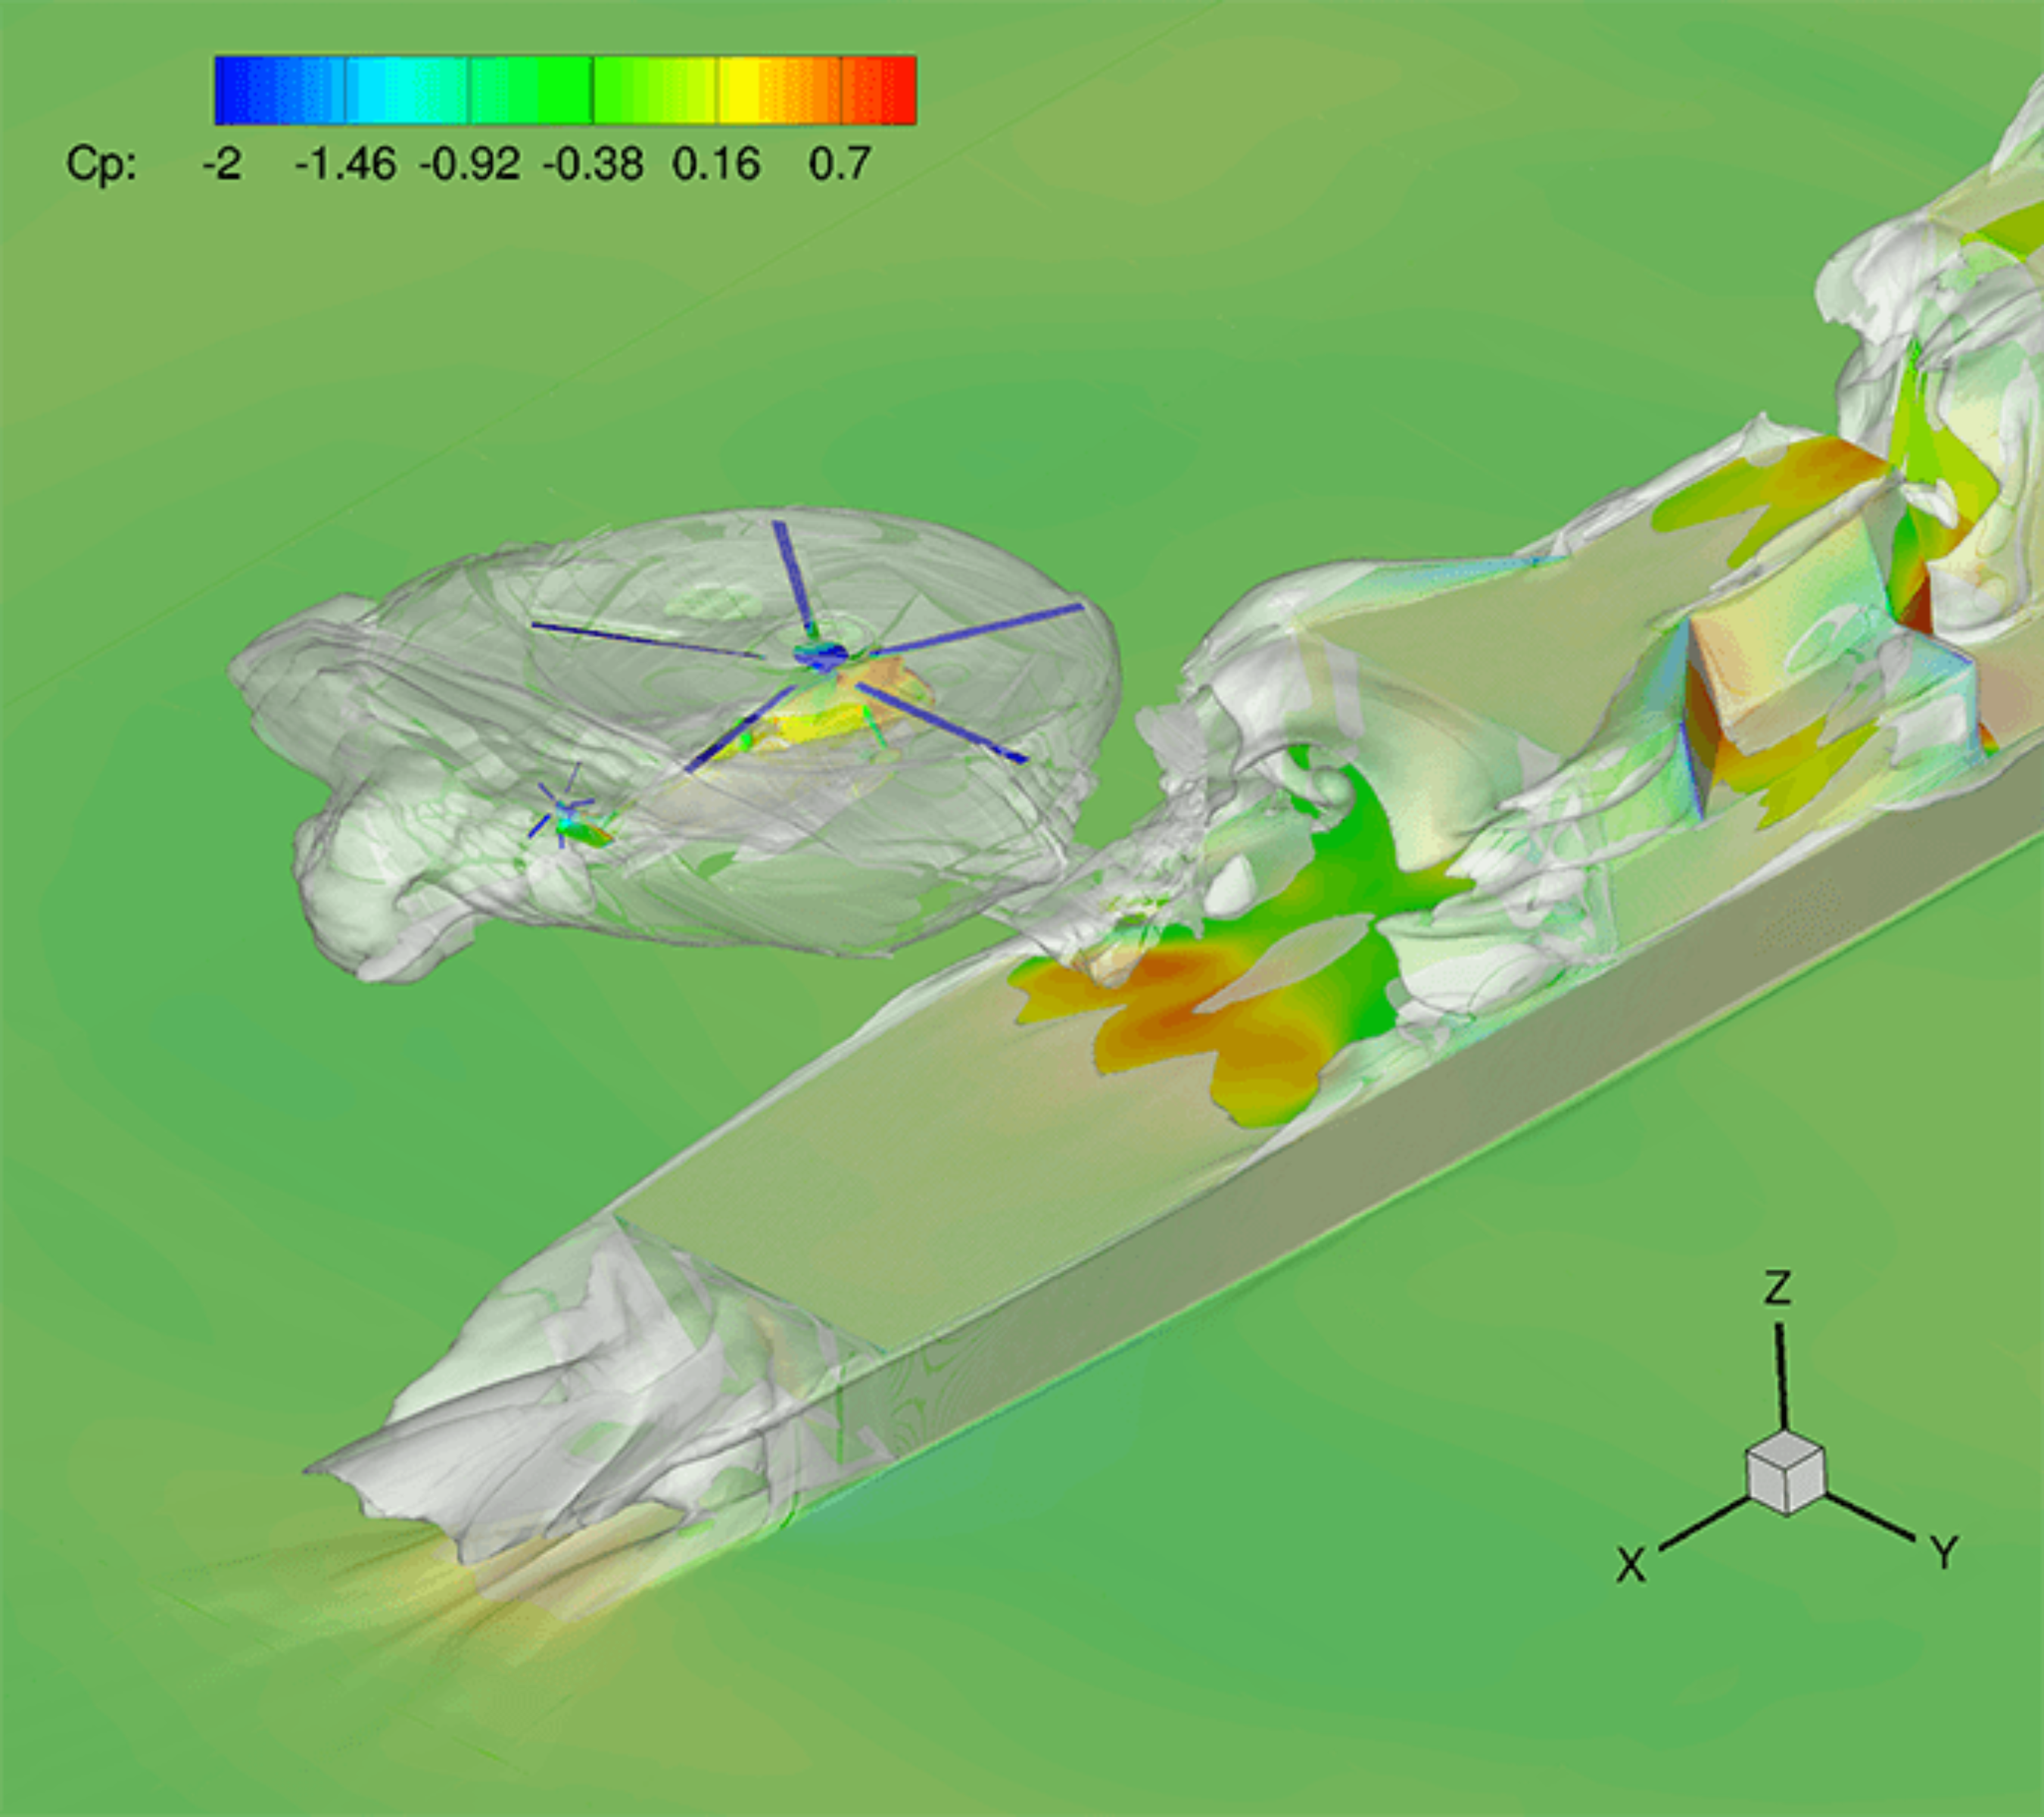 Visualisation of the ship and helicopter wakes during a coupled calculation